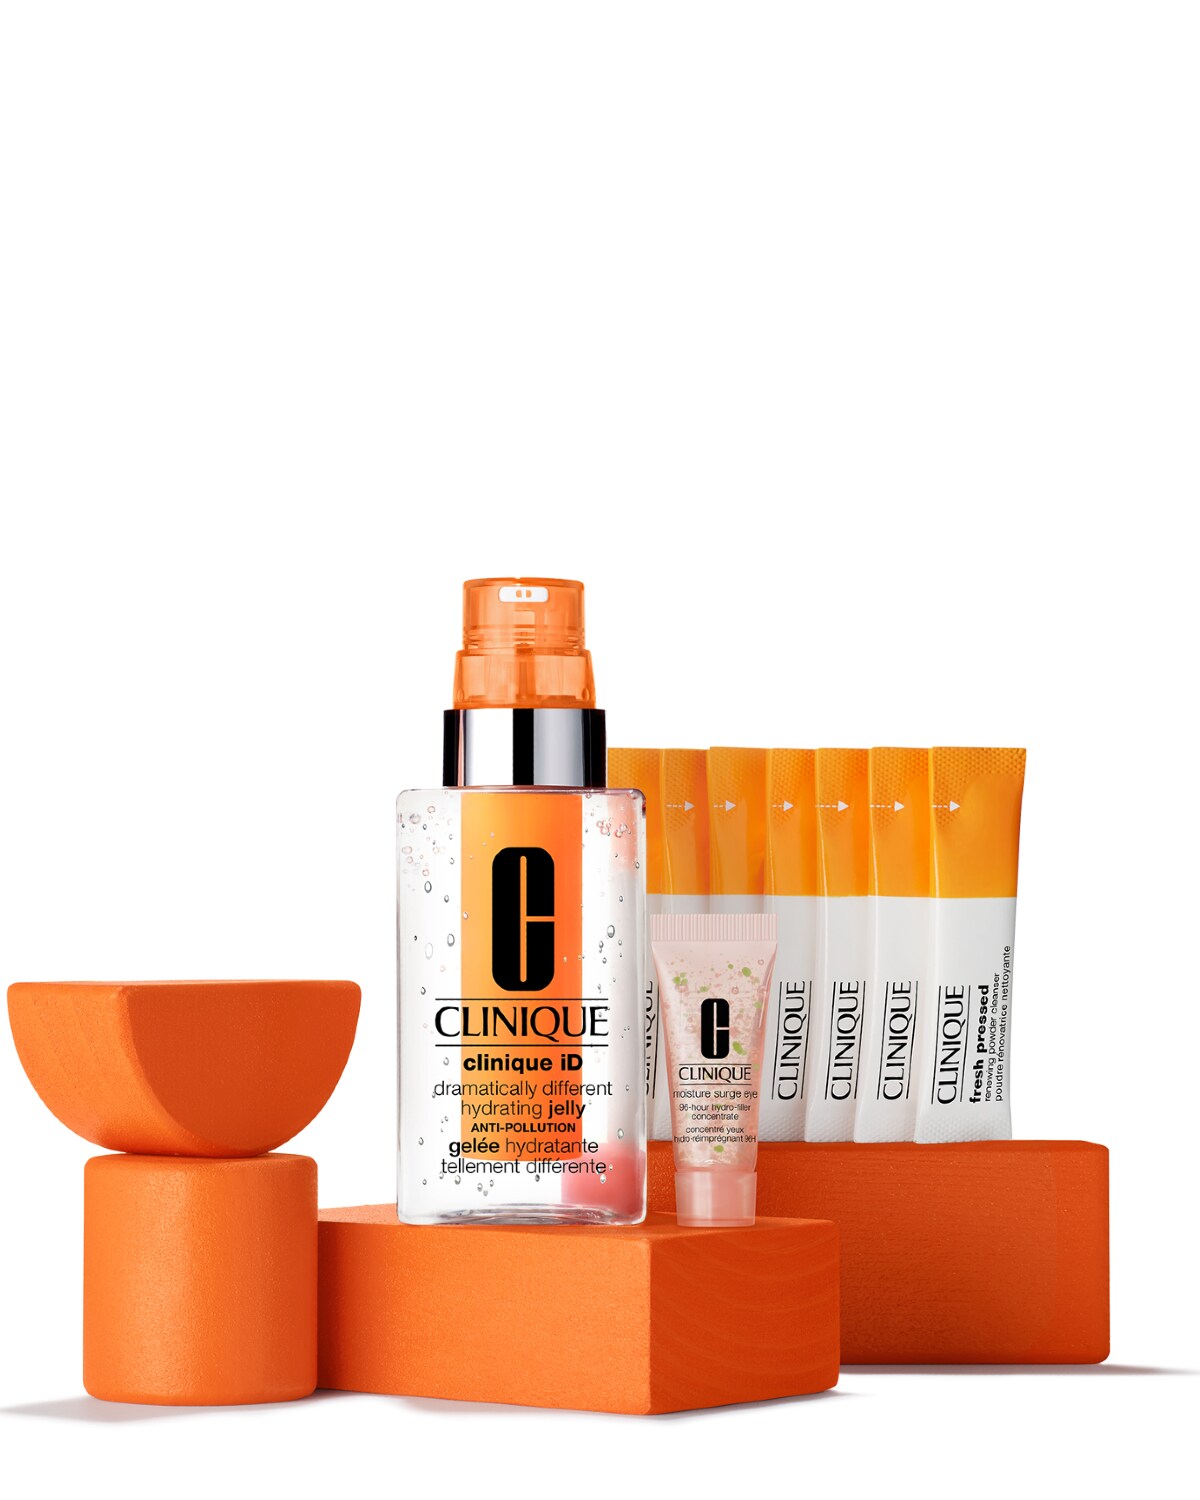 Super Charged Skin, Your Way: Clinique iD set Fatigue